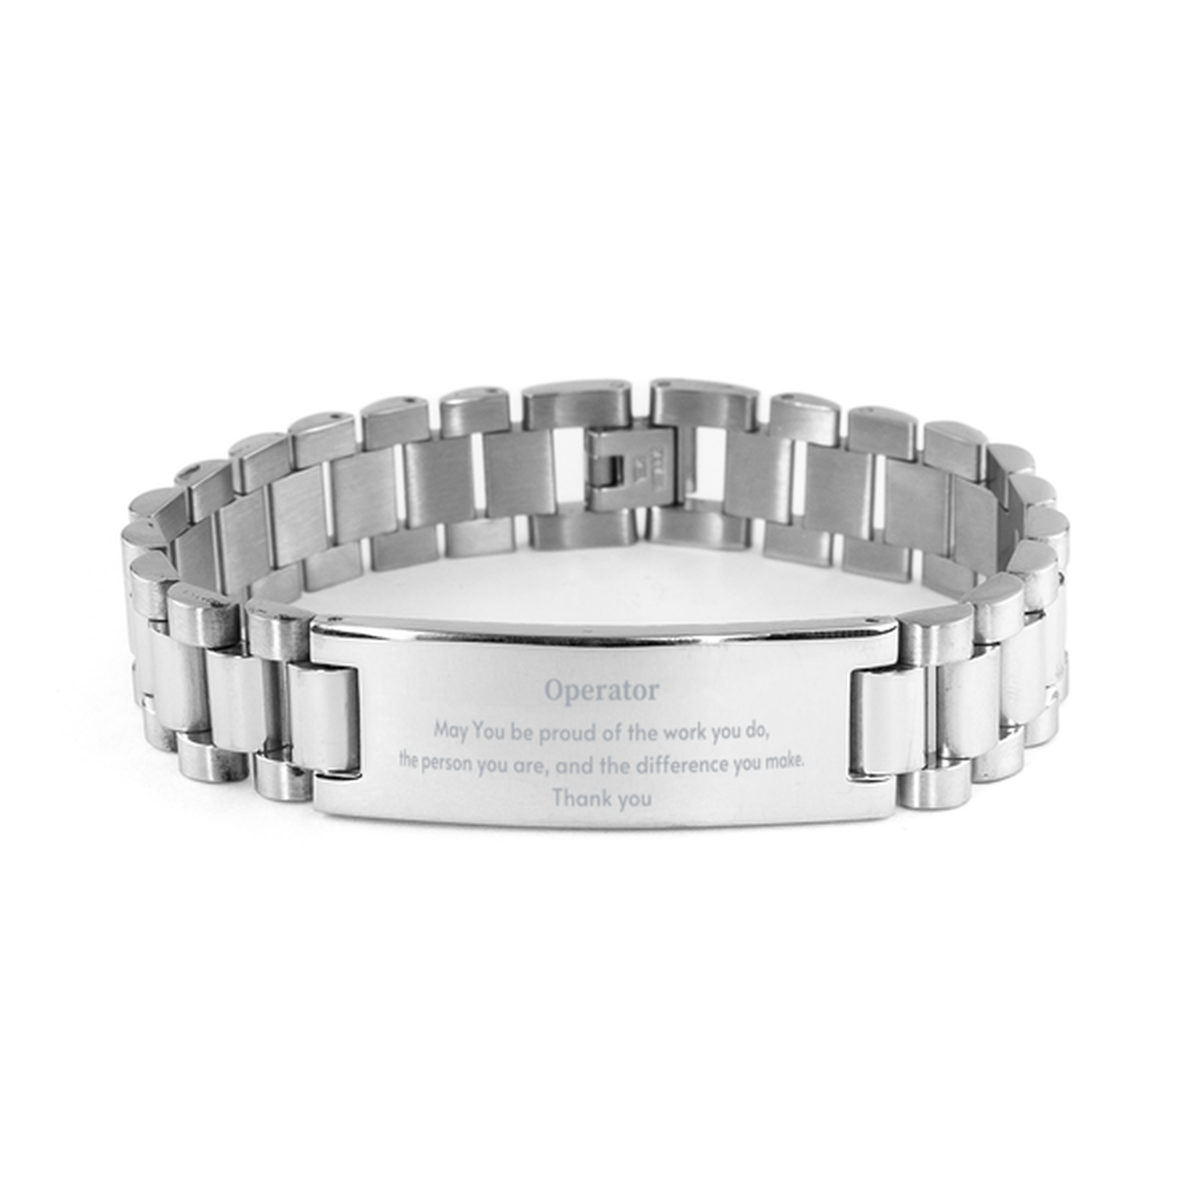 Heartwarming Ladder Stainless Steel Bracelet Retirement Coworkers Gifts for Operator, Operator May You be proud of the work you do, the person you are Gifts for Boss Men Women Friends